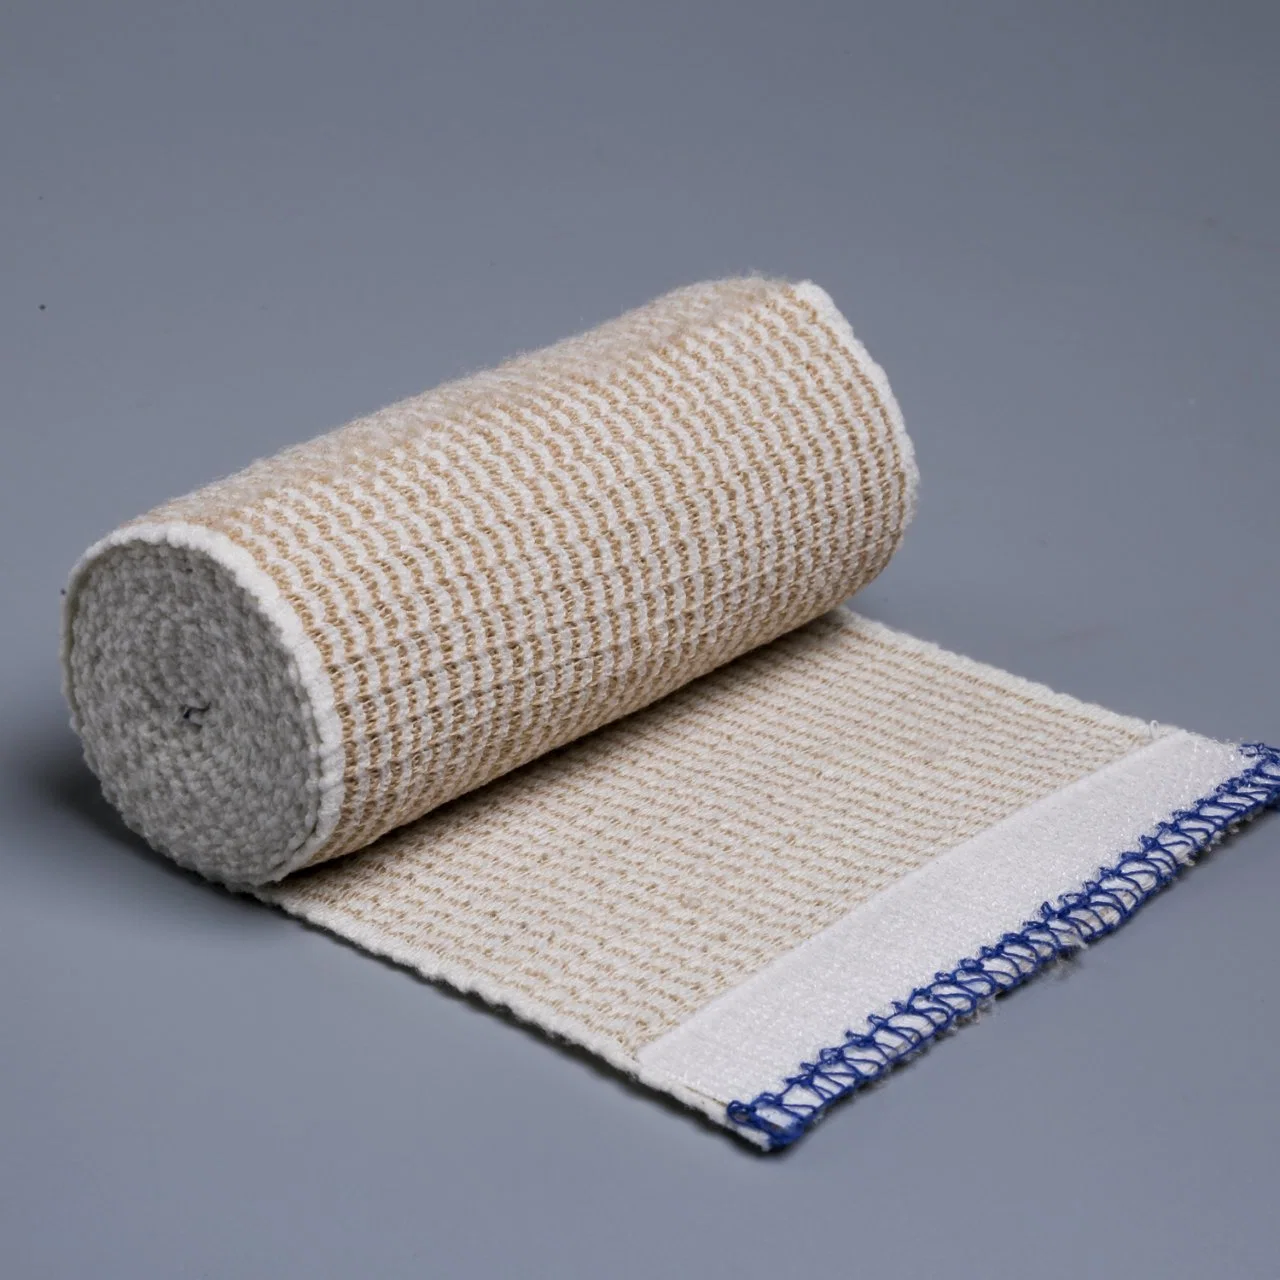 Professional Healthcare Products High Elastic Bandage Cotton First Aid Wound Care Soft Elastic Bandage